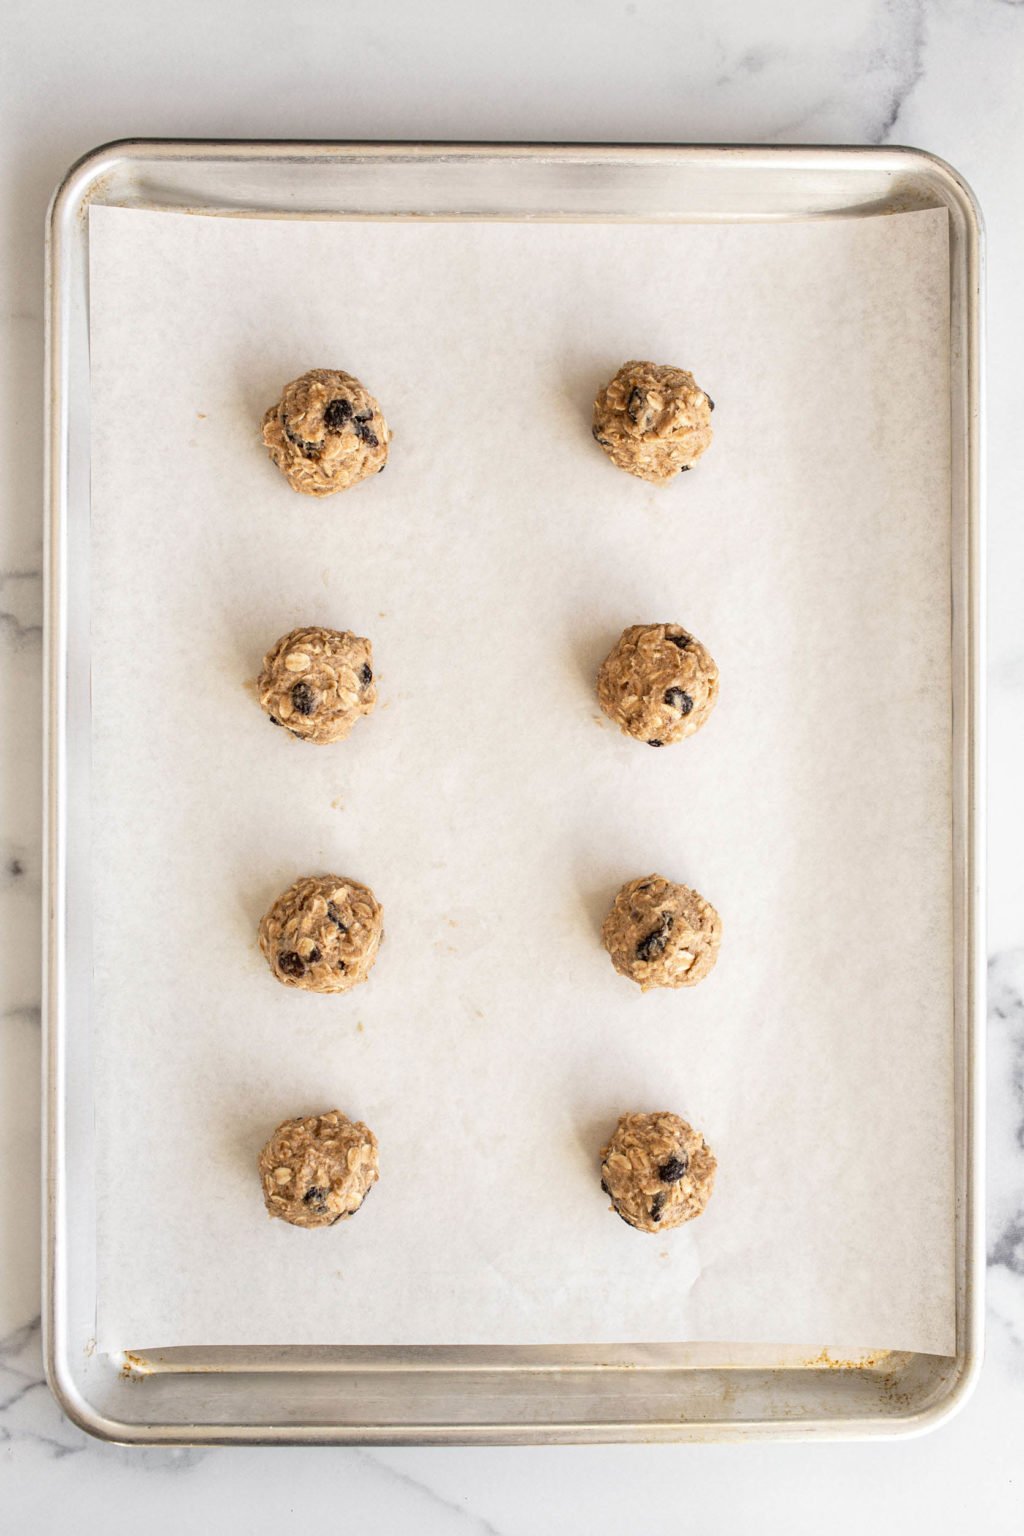 Neat, round balls of cookie dough rest on a lined baking sheet.